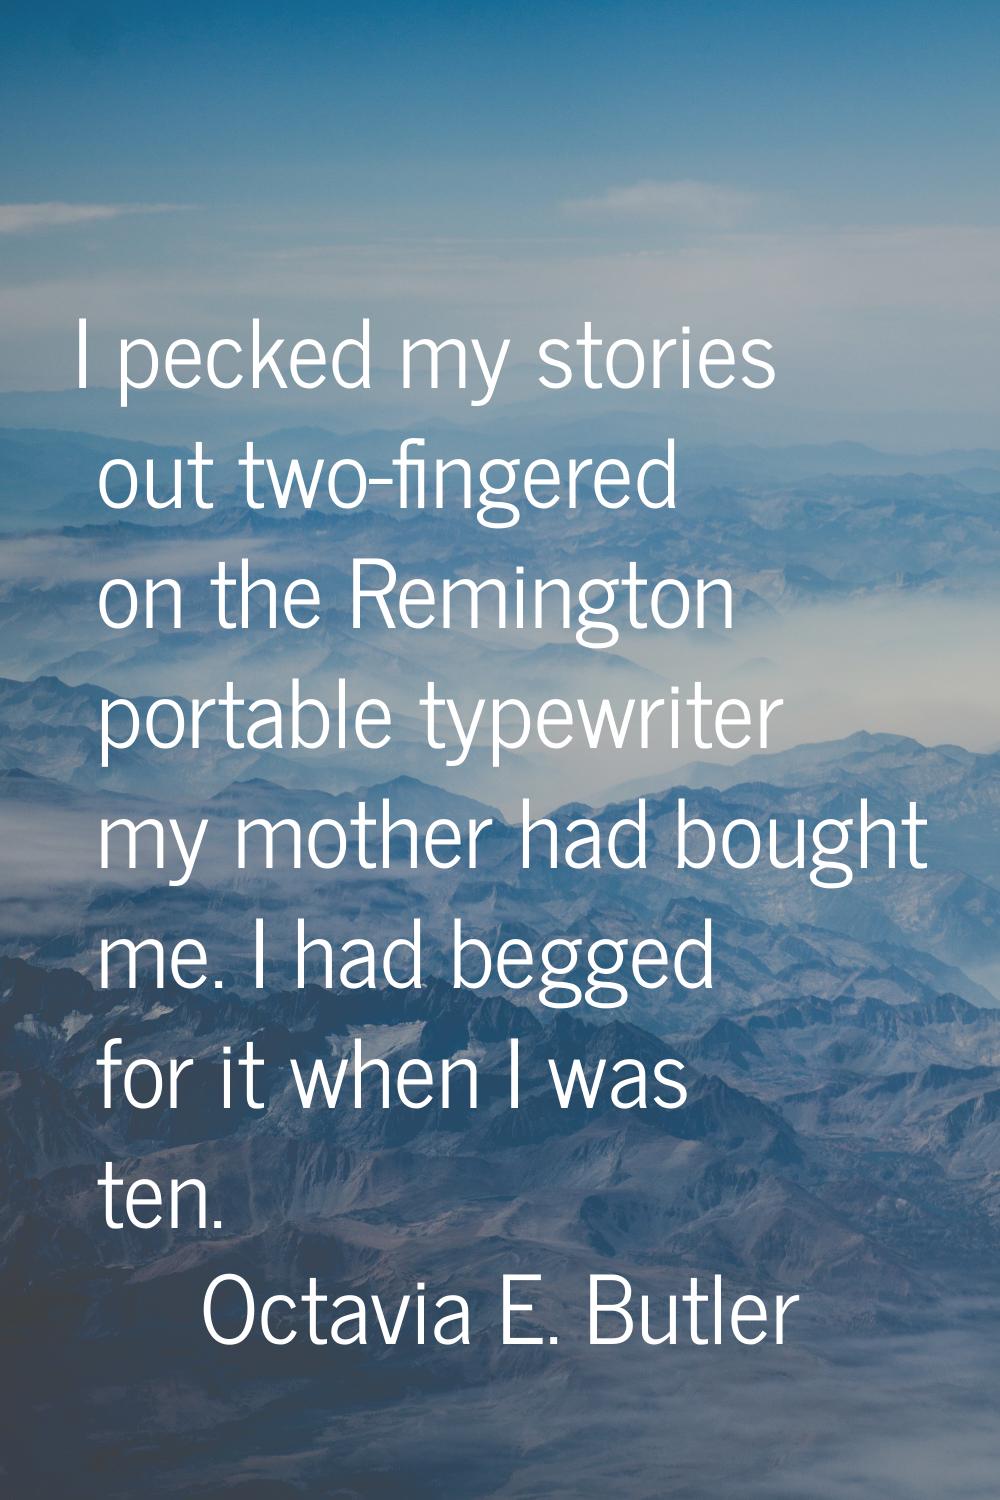 I pecked my stories out two-fingered on the Remington portable typewriter my mother had bought me. 